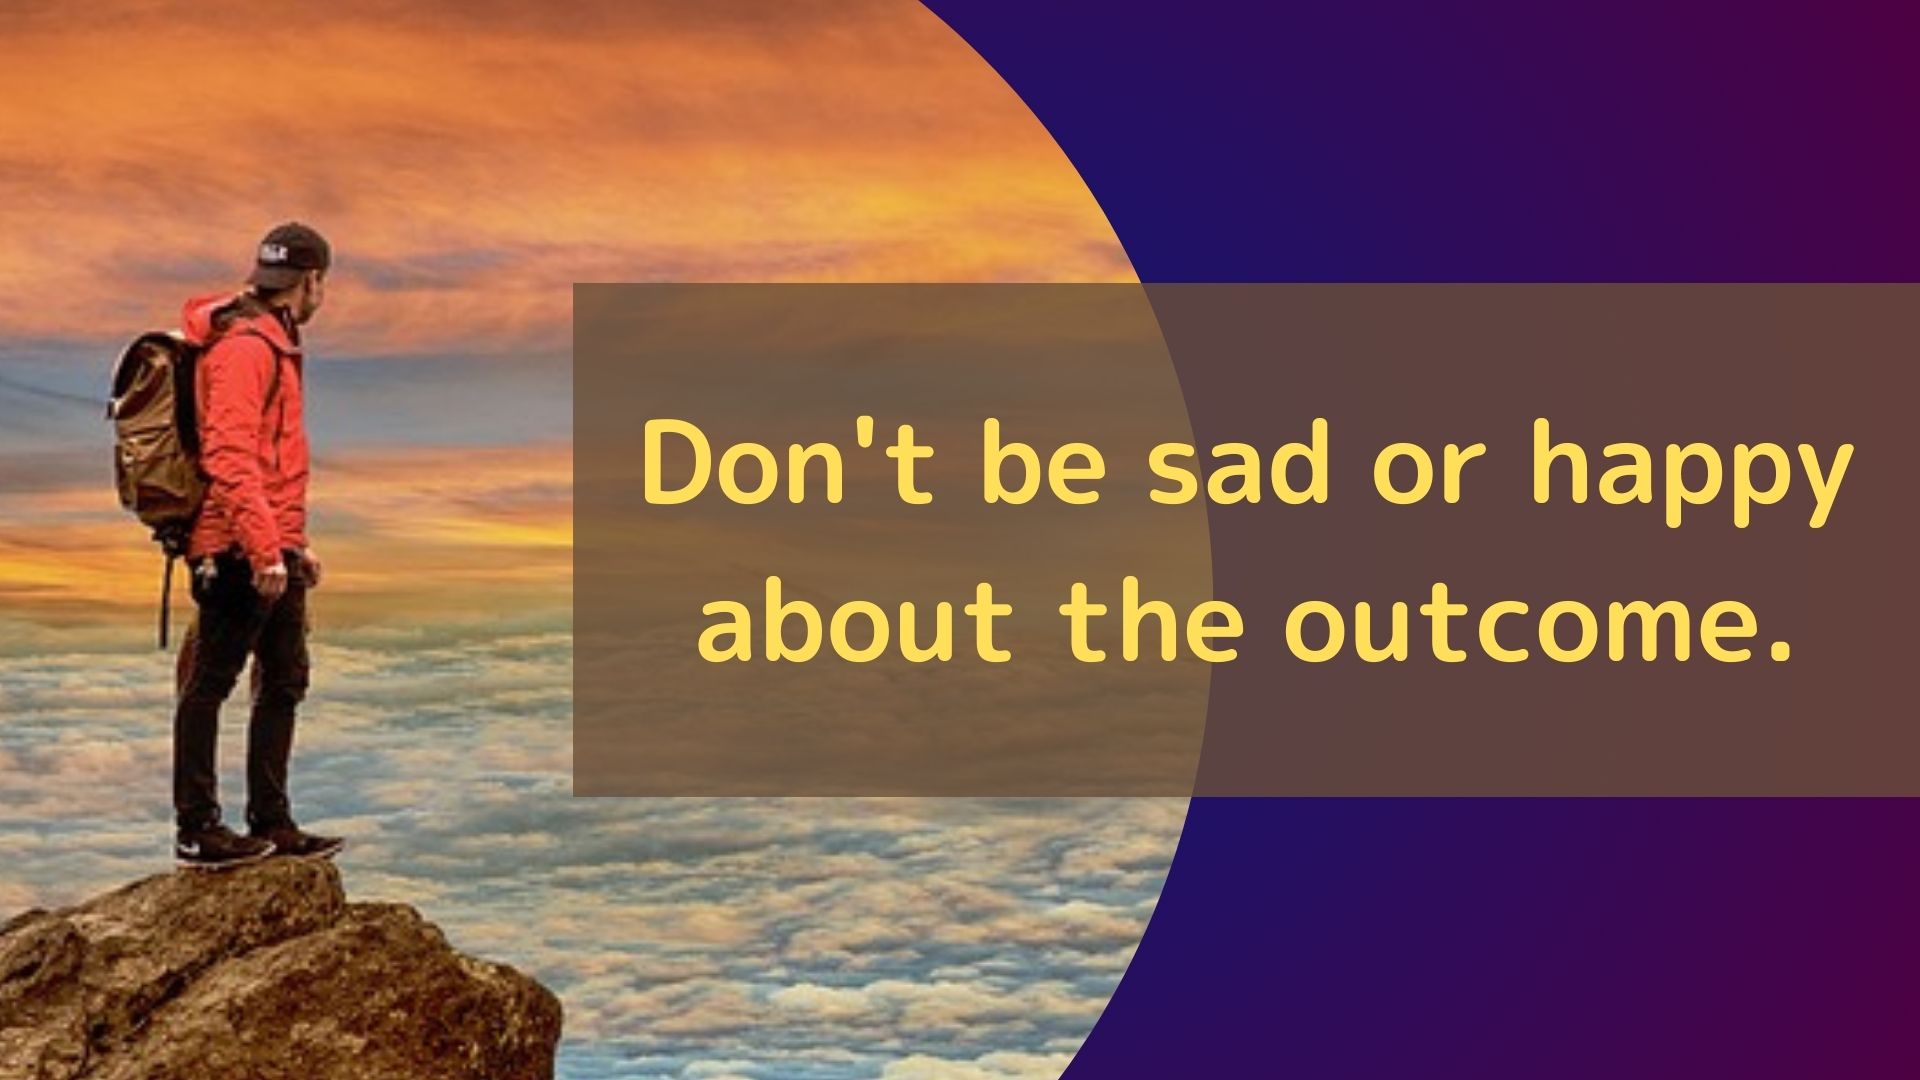 Don't be sad or happy about the outcome.